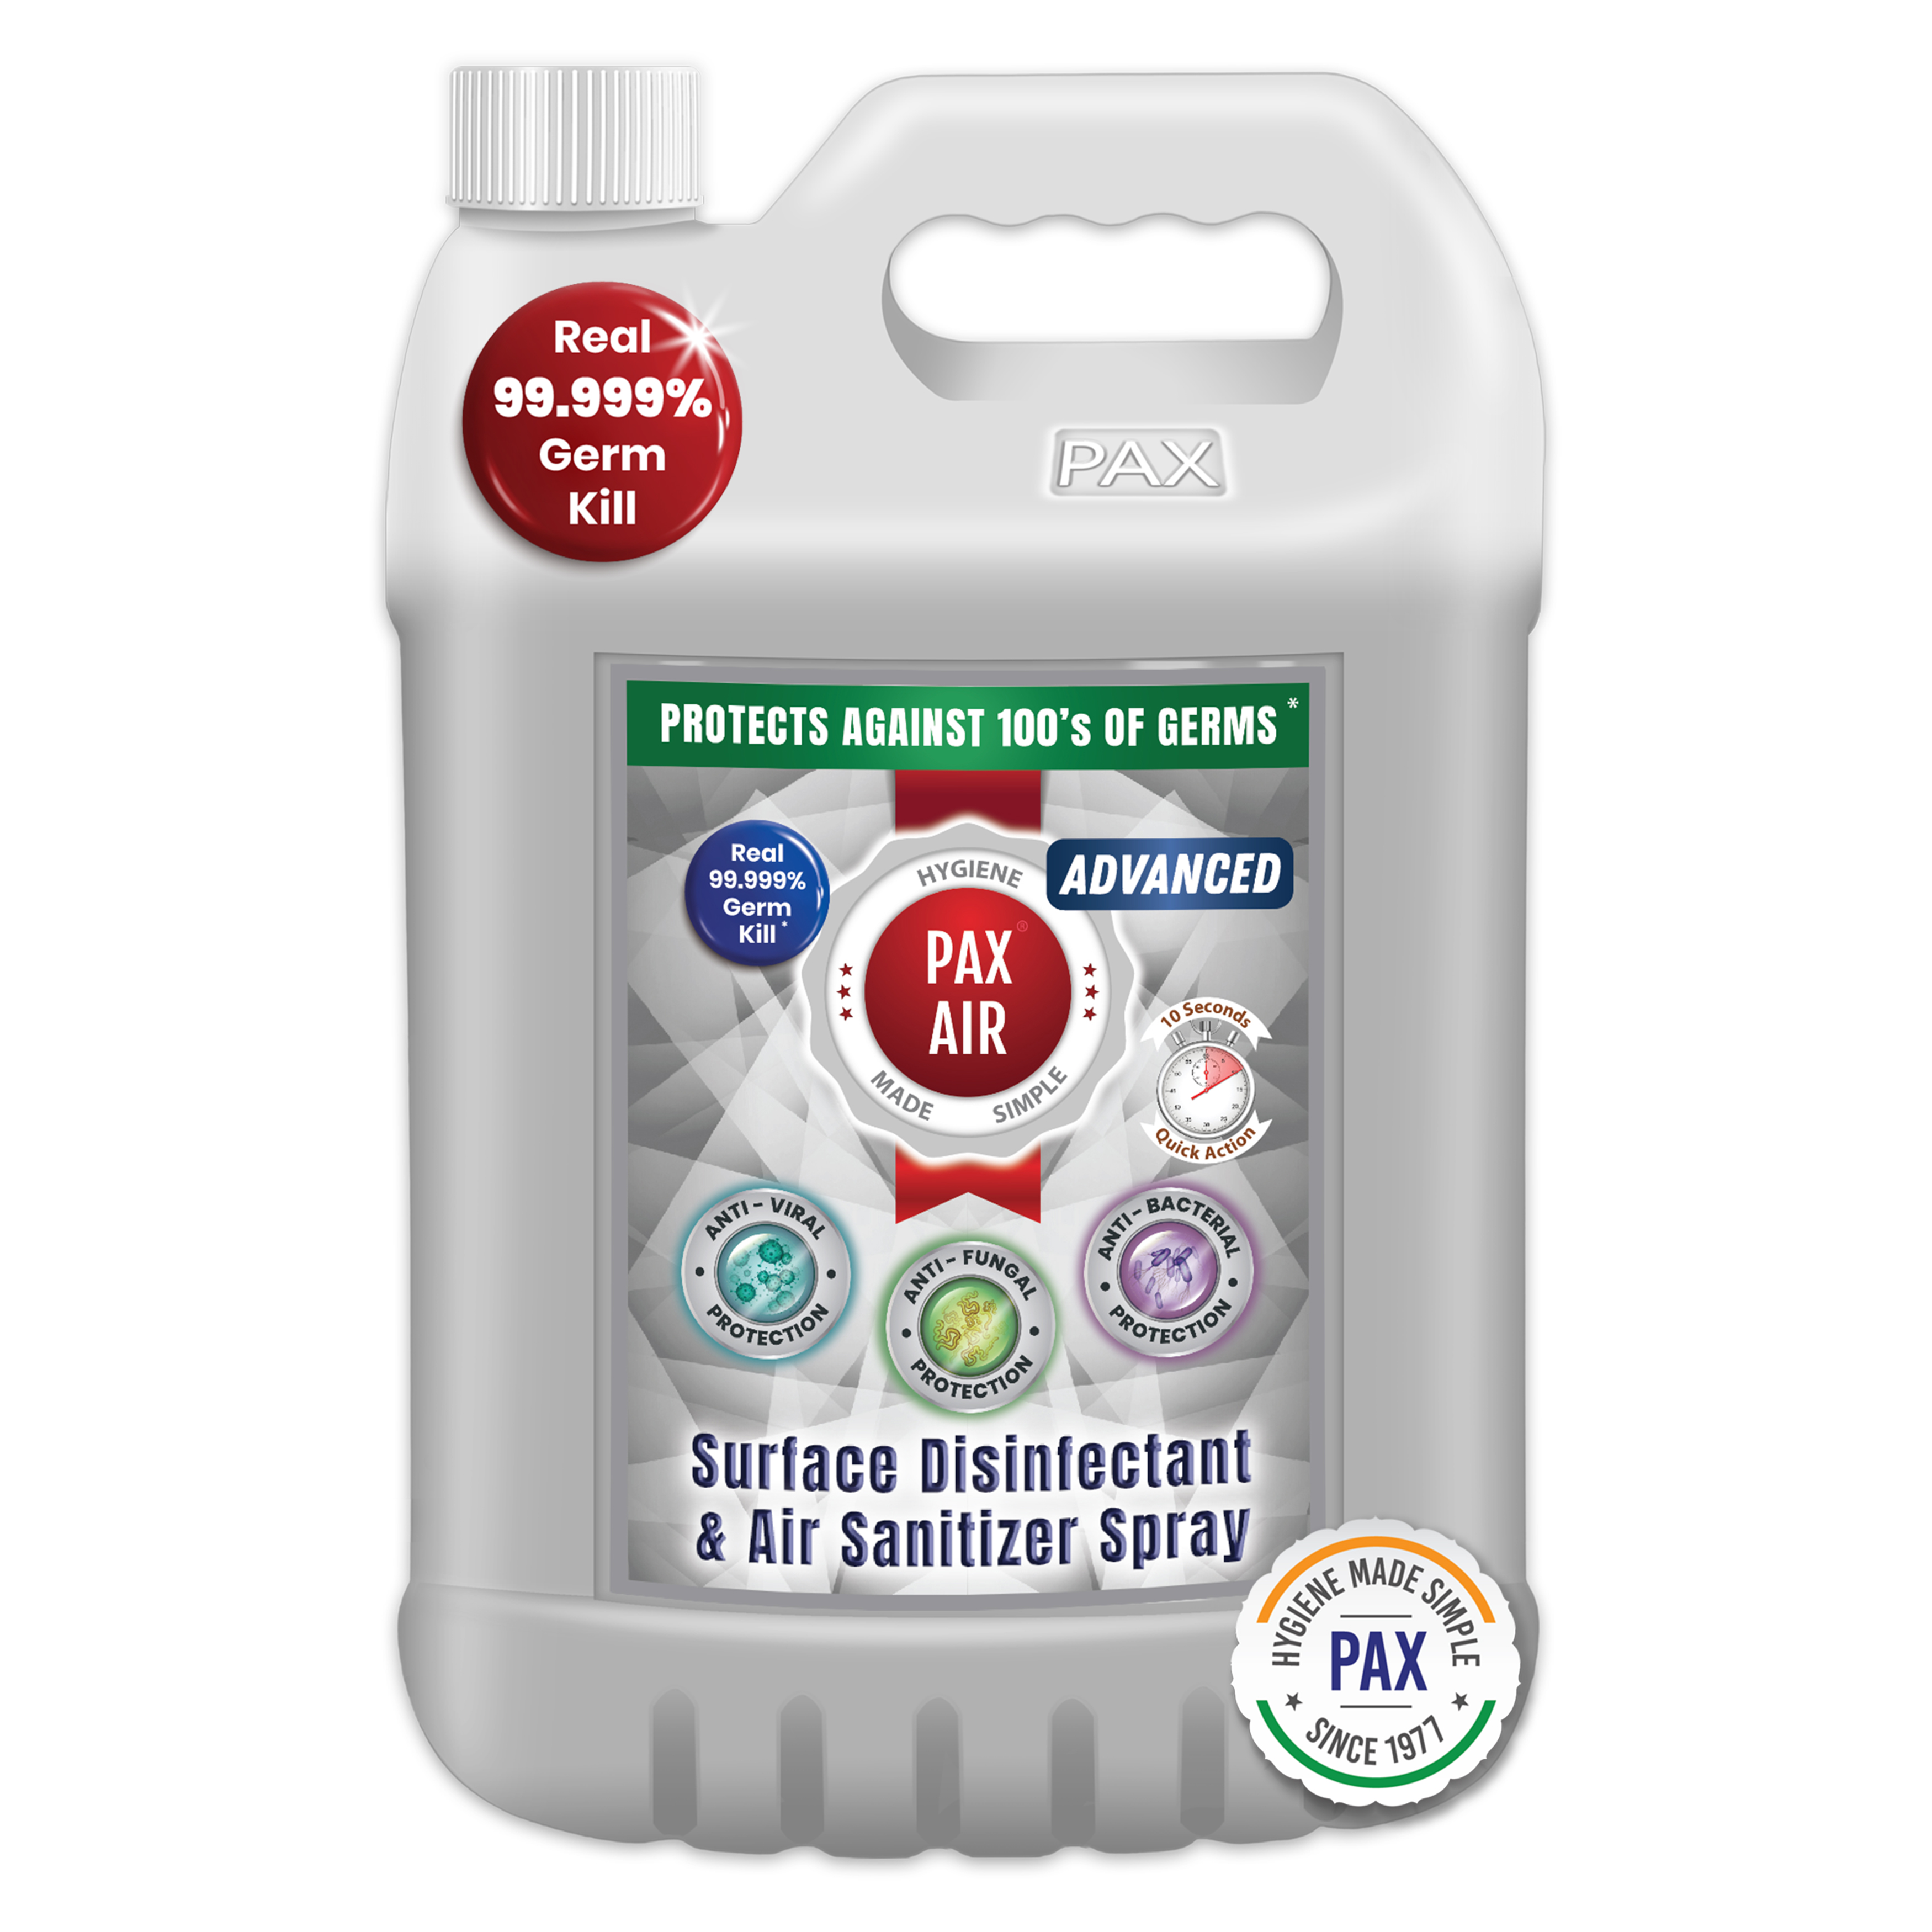 PaxAir Advanced Surface Disinfectant Air Sanitizer Spray 5L -Photo's By GPN